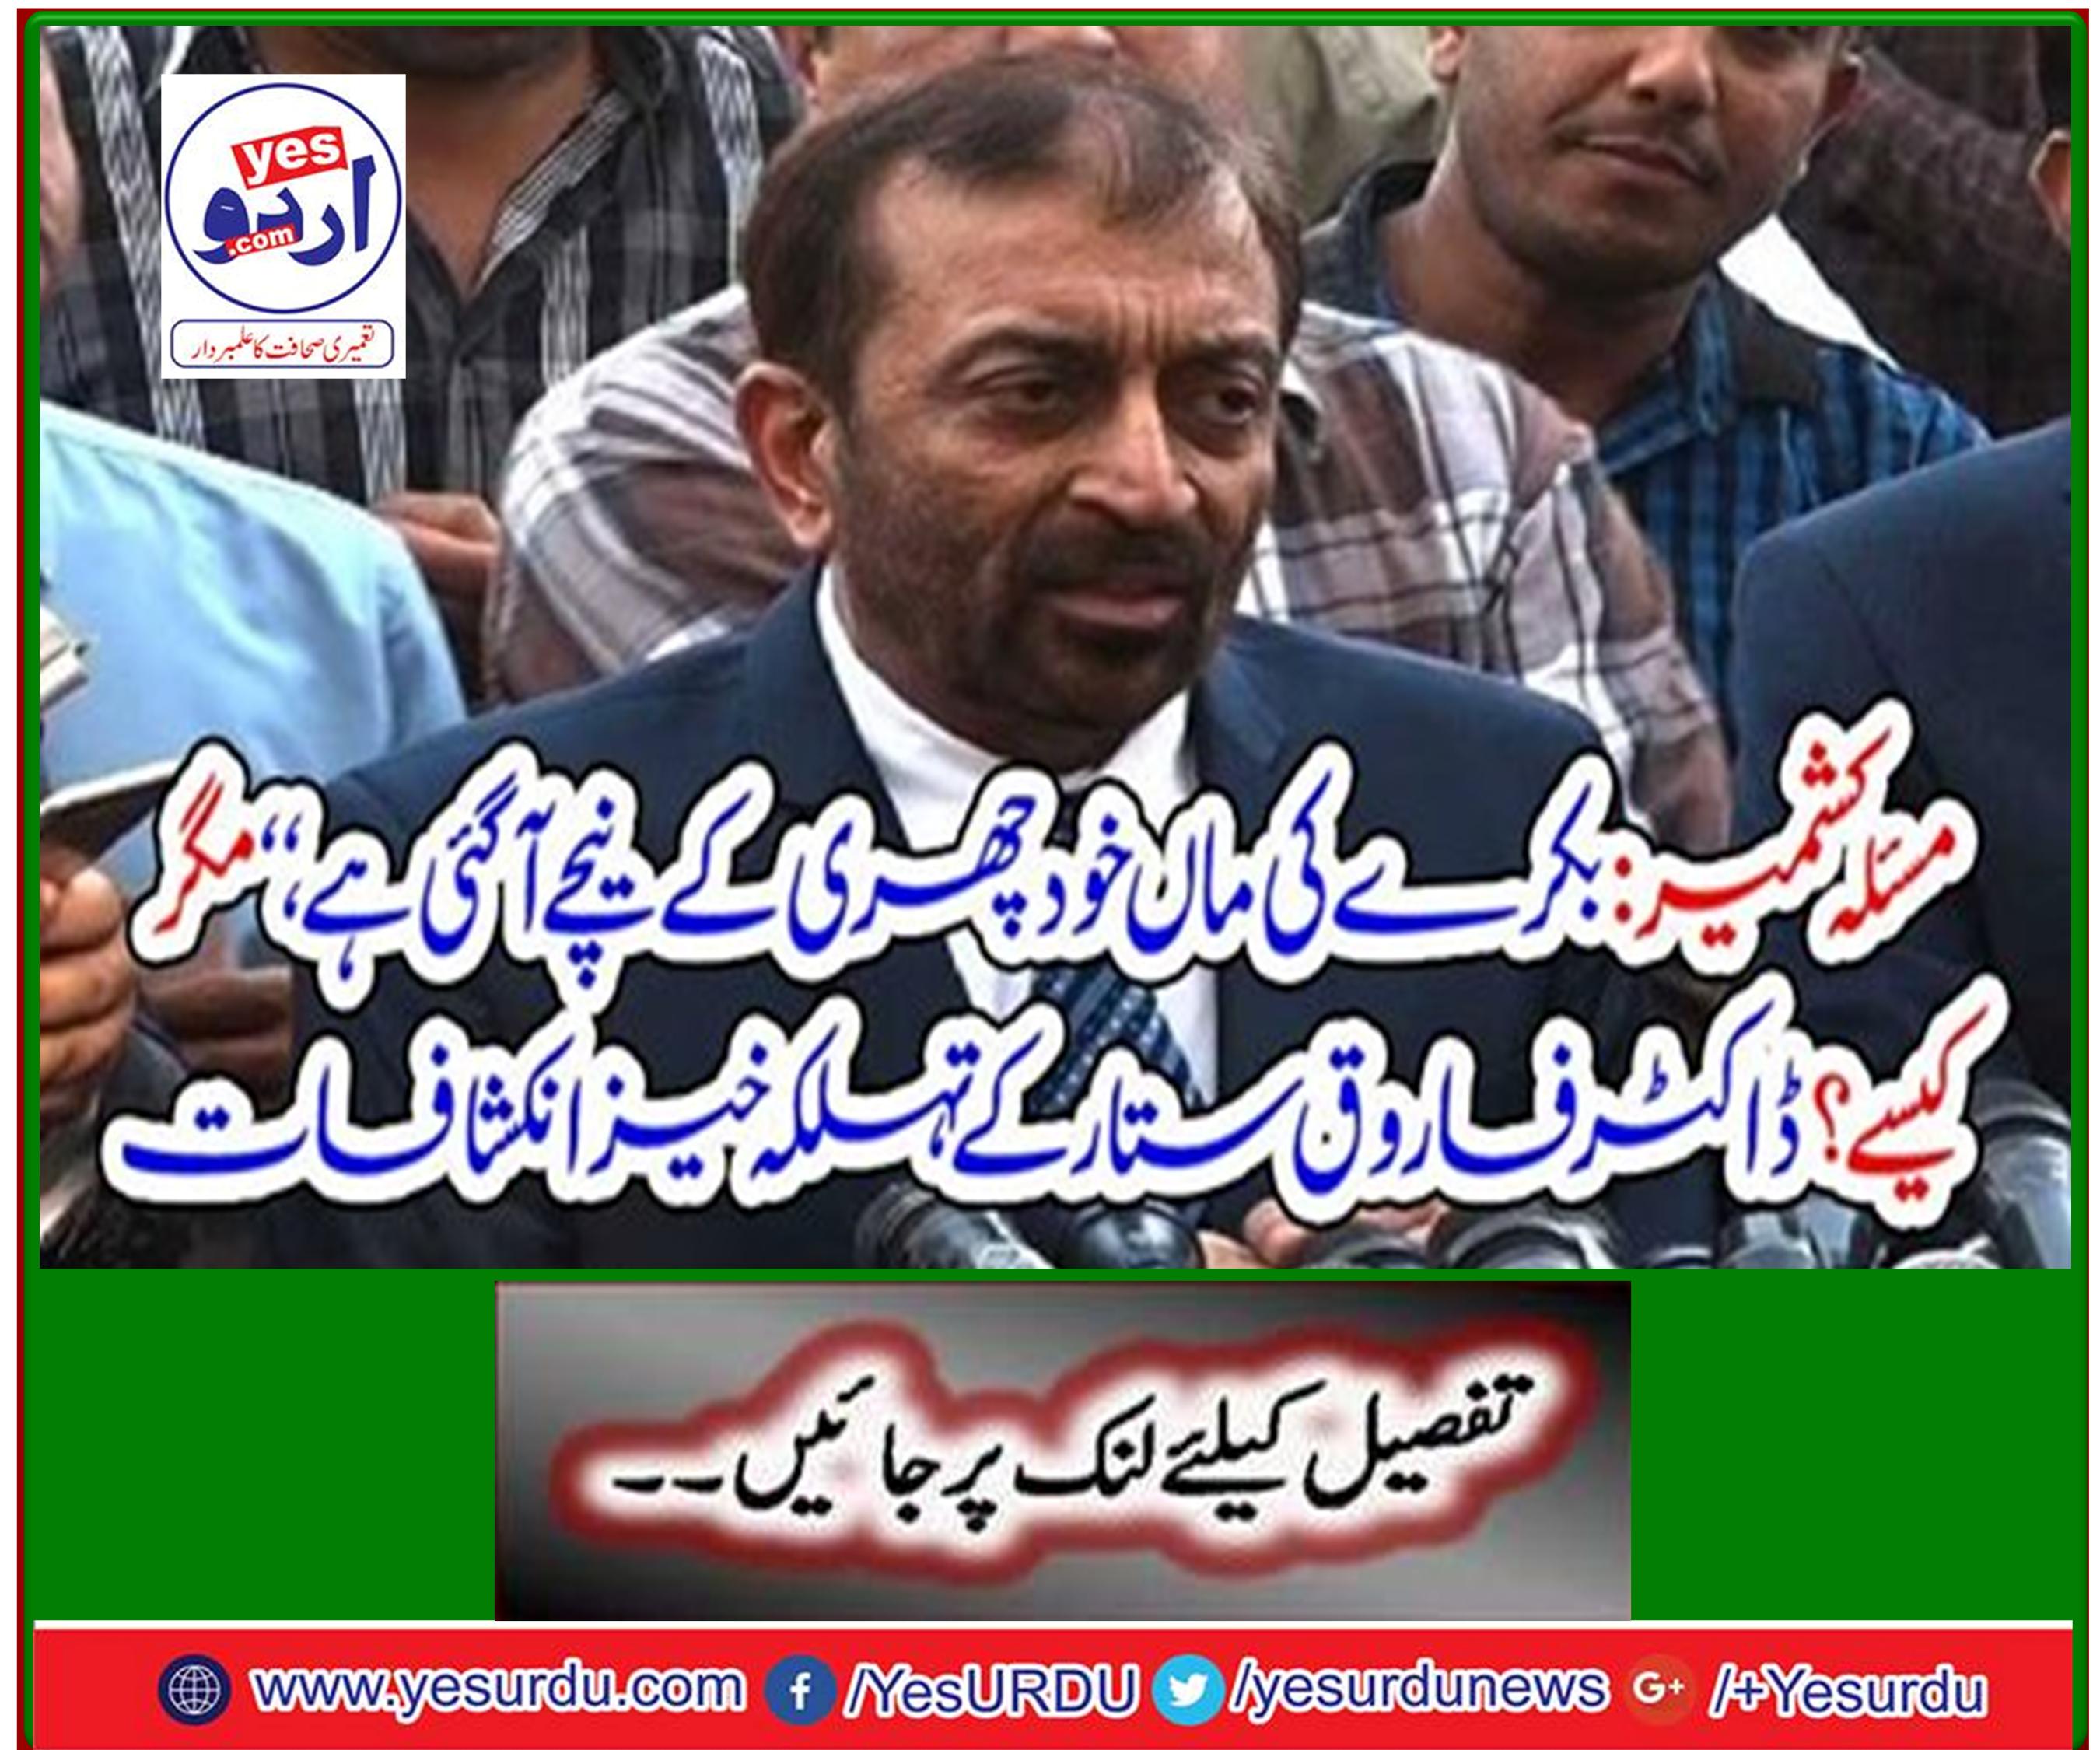 Issue Kashmir: The goat's mother herself has come under the knife, "But how? Spectacular revelations of Dr. Farooq Sattar